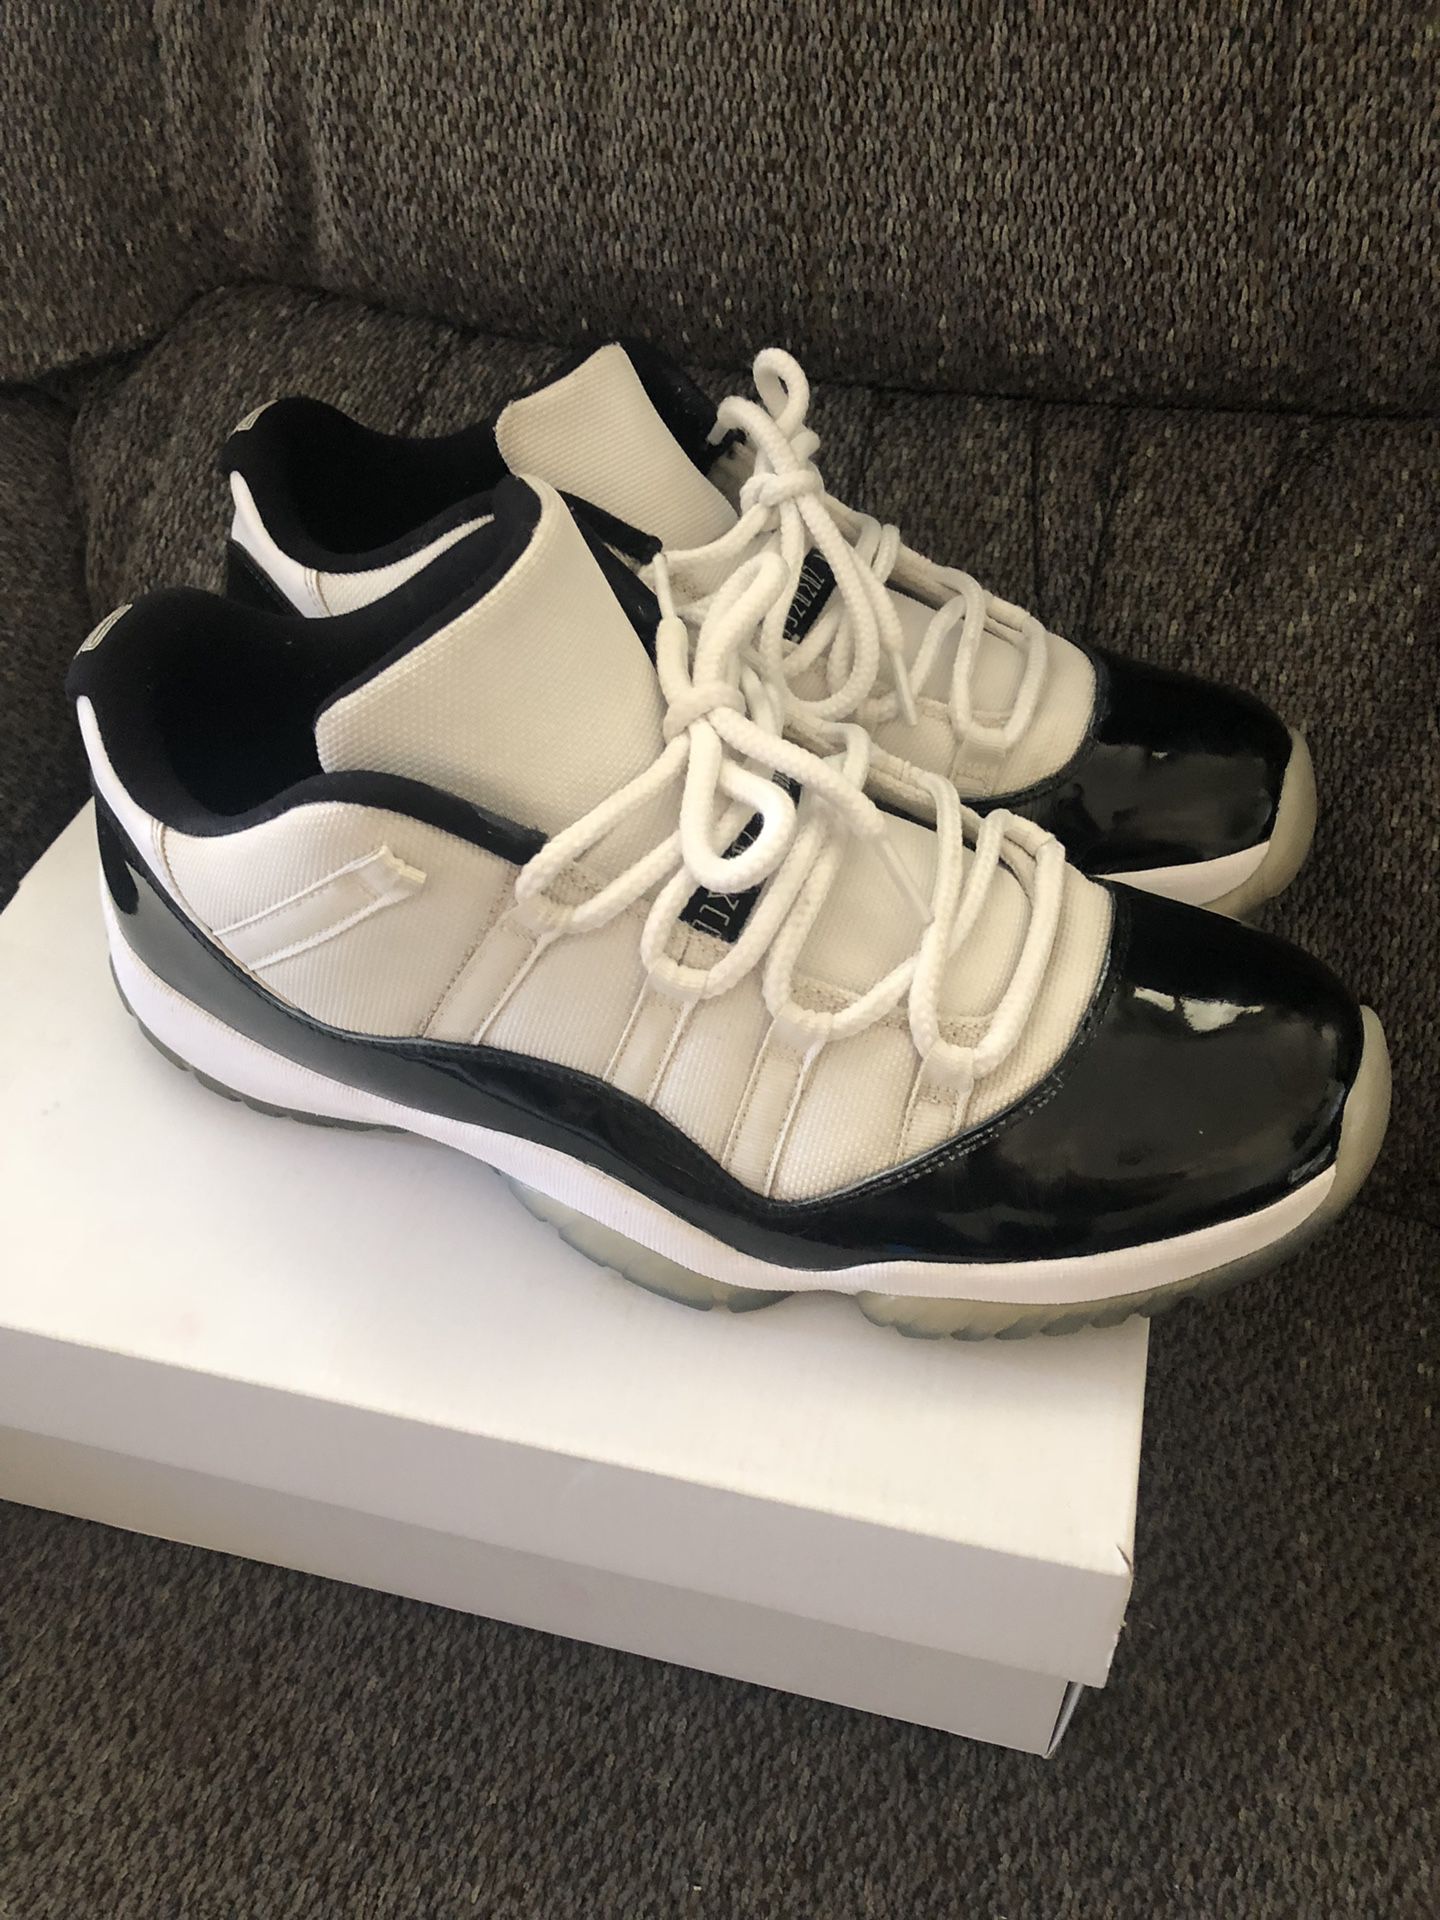 Jordan 11 concords high and low sz 13 for Sale in Kyle, TX - OfferUp